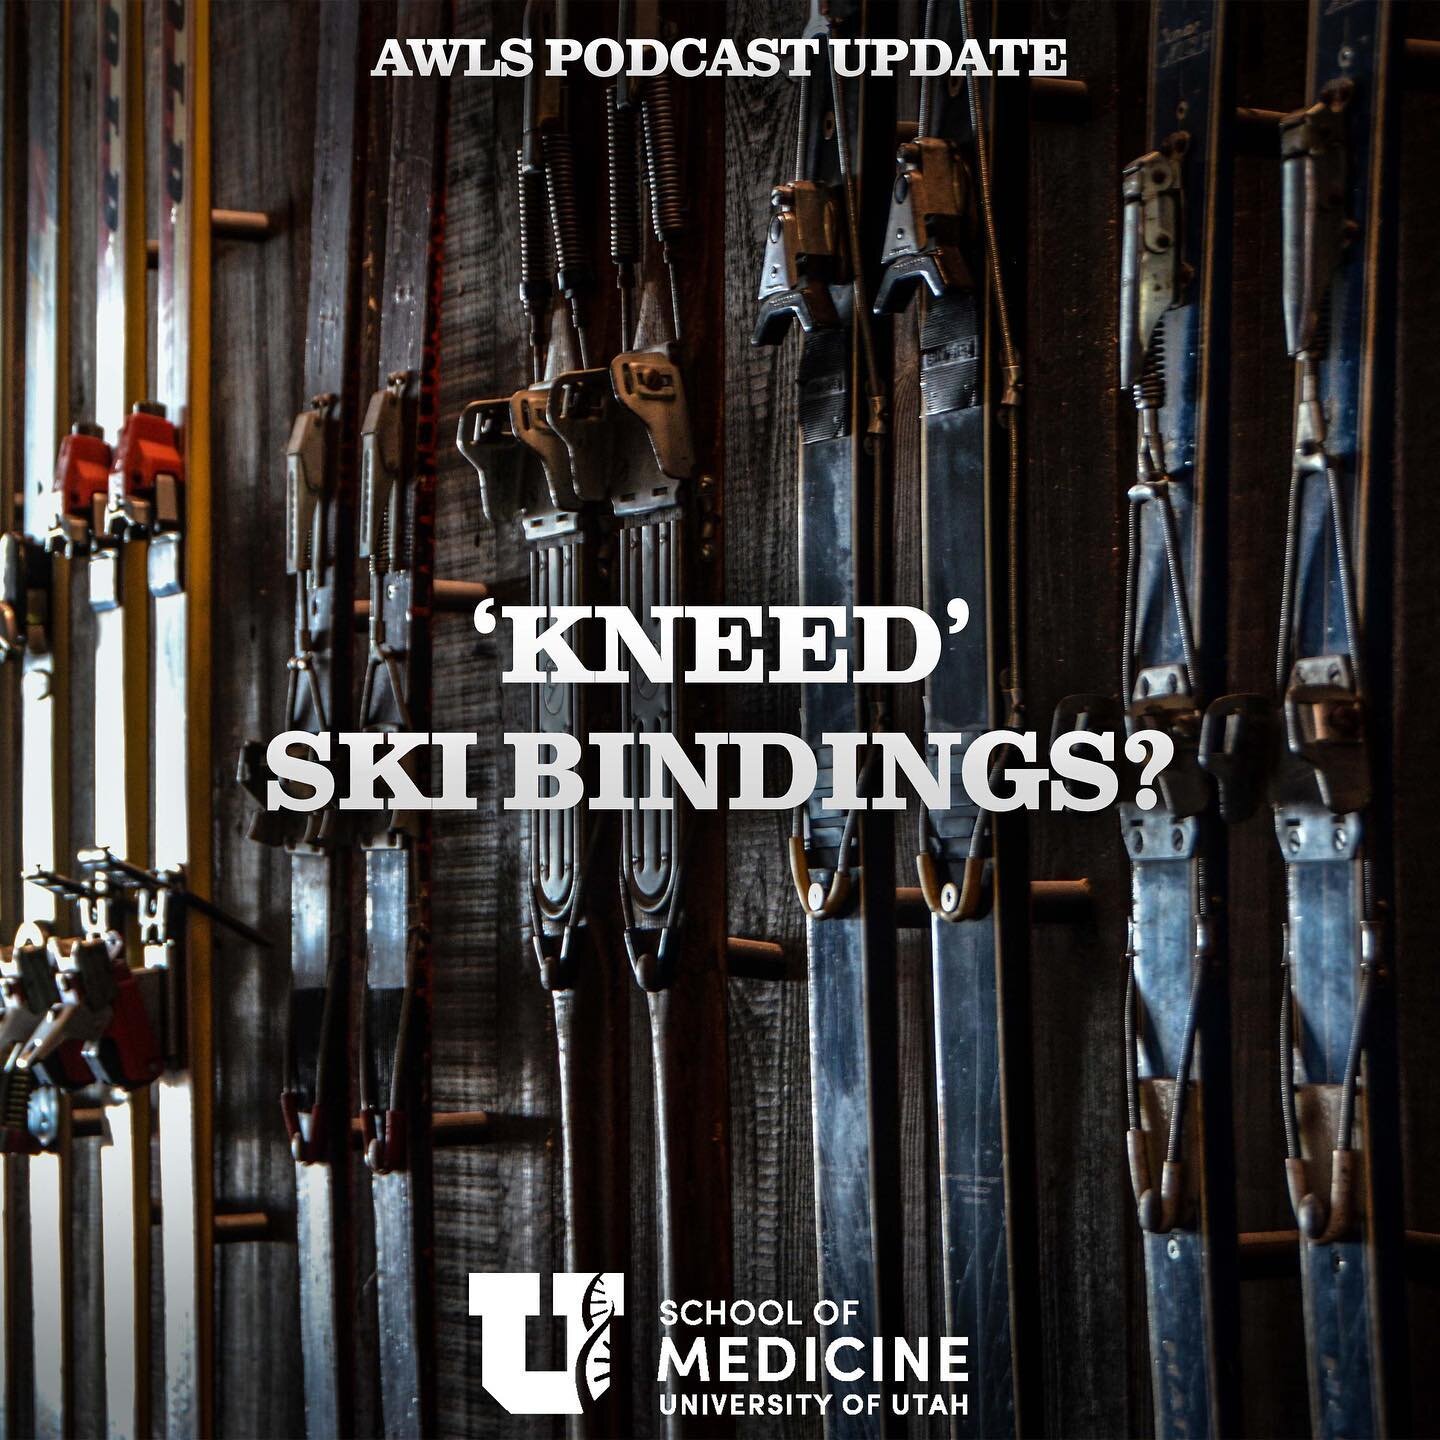 Ankles and legs are protected with well oiled ski bindings. But the knees sure have taken a hit since bindings came out.&nbsp;New quick release heel bindings are supposed to help. Do we 'kneed' them?&nbsp;This update podcast looks at common ski injur